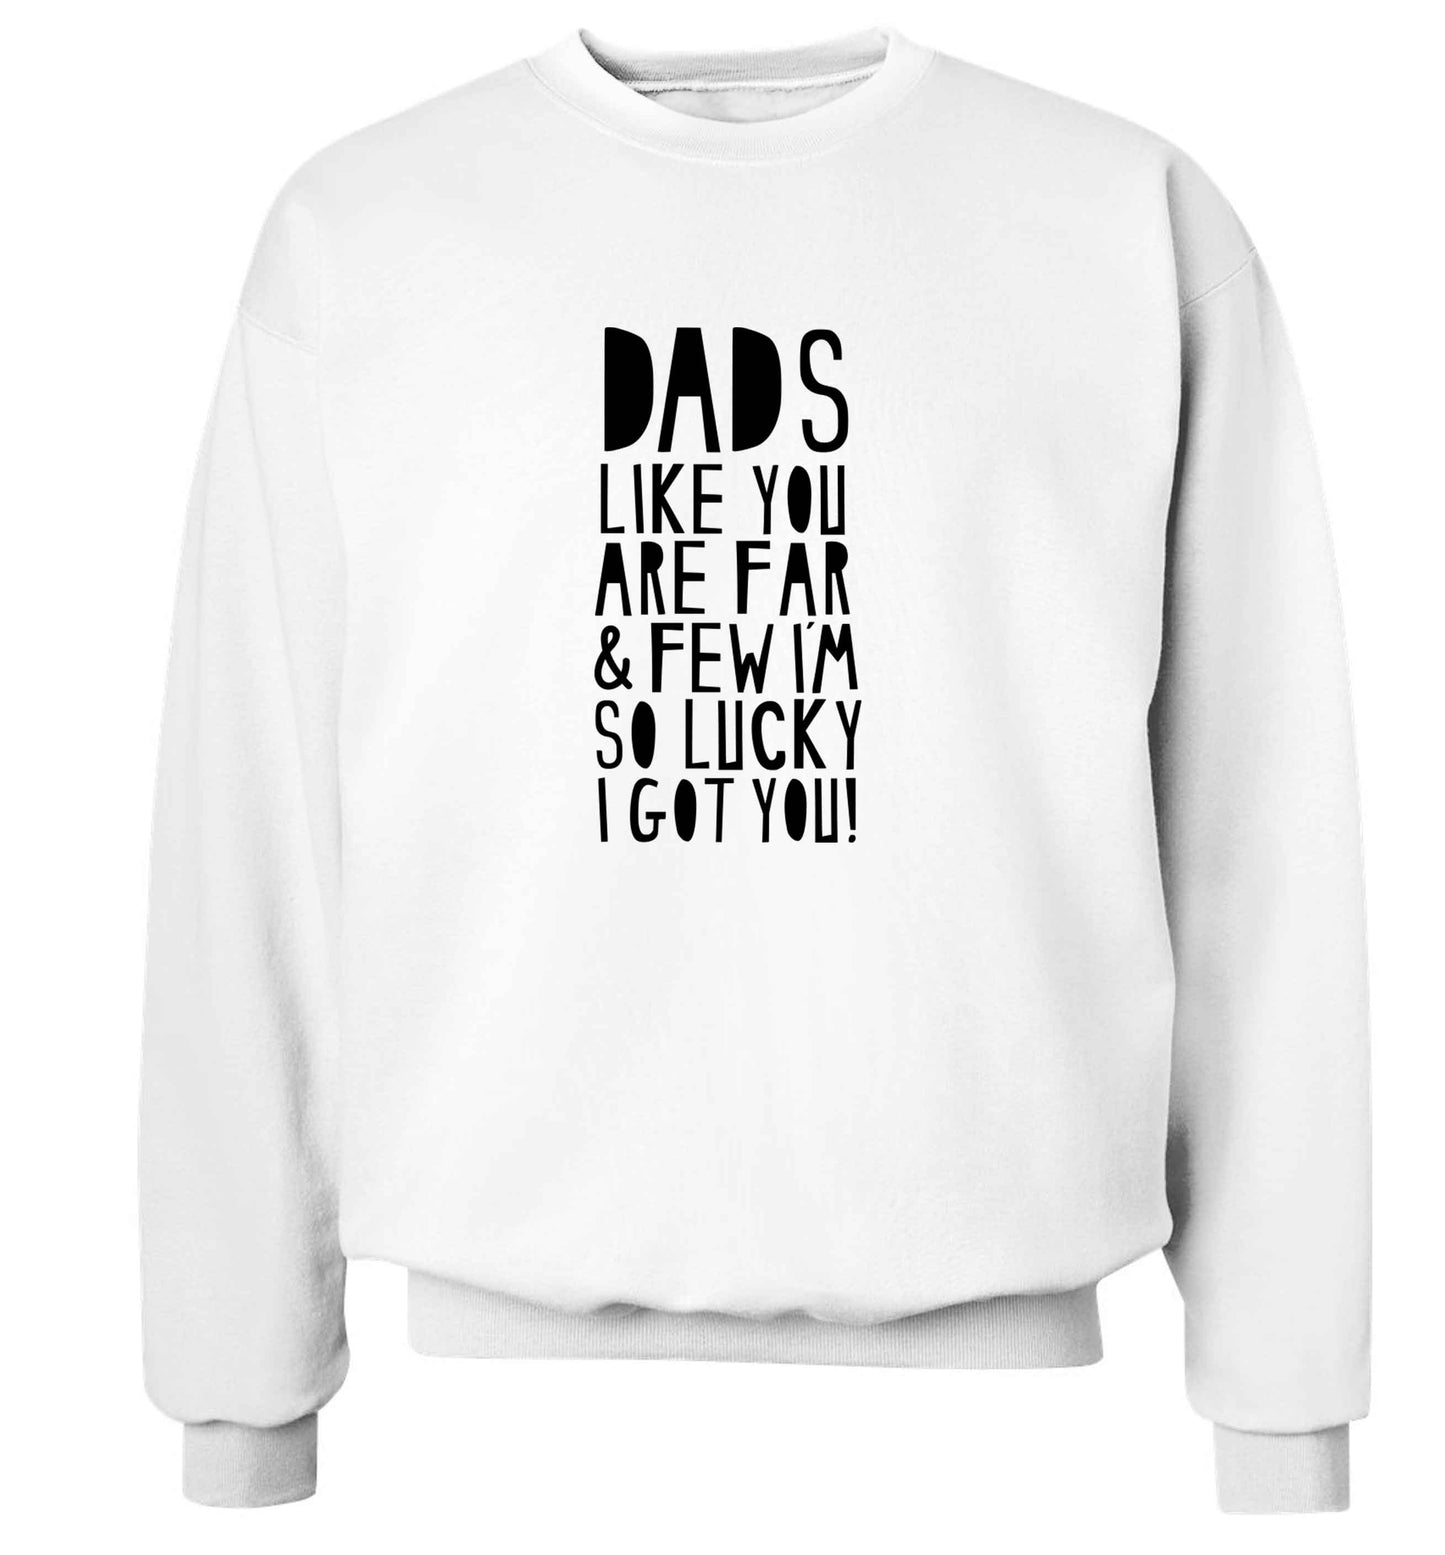 Dads like you are far and few I'm so luck I got you! adult's unisex white sweater 2XL